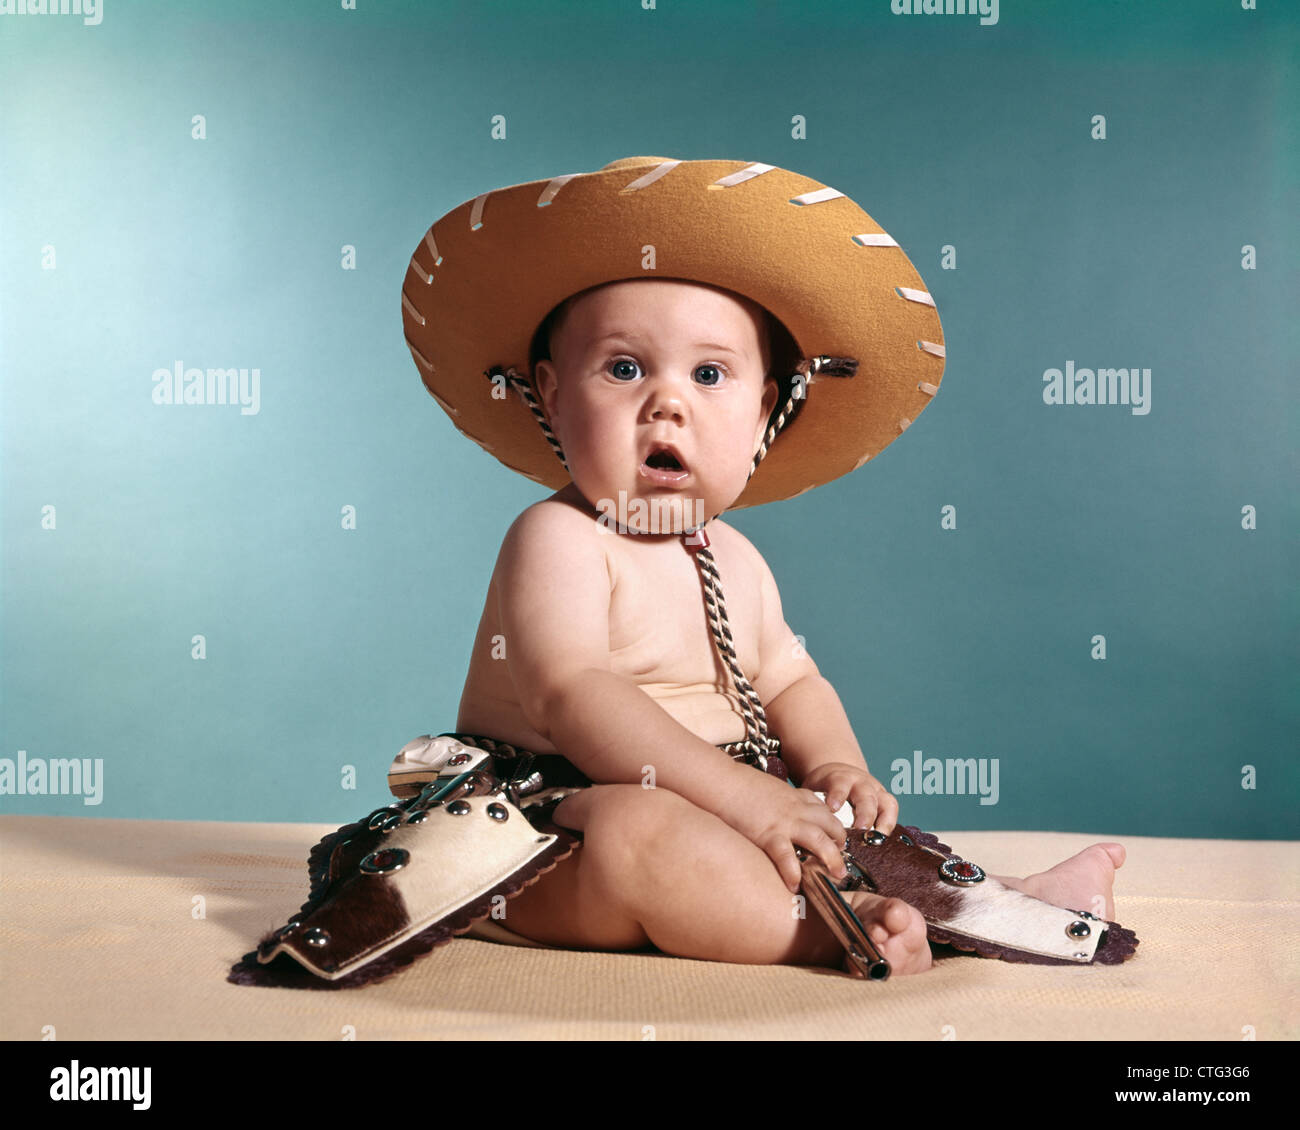 1960s BABY WEARING COWBOY COSTUME WITH FUNNY FACIAL EXPRESSION LOOKING AT  CAMERA Stock Photo - Alamy